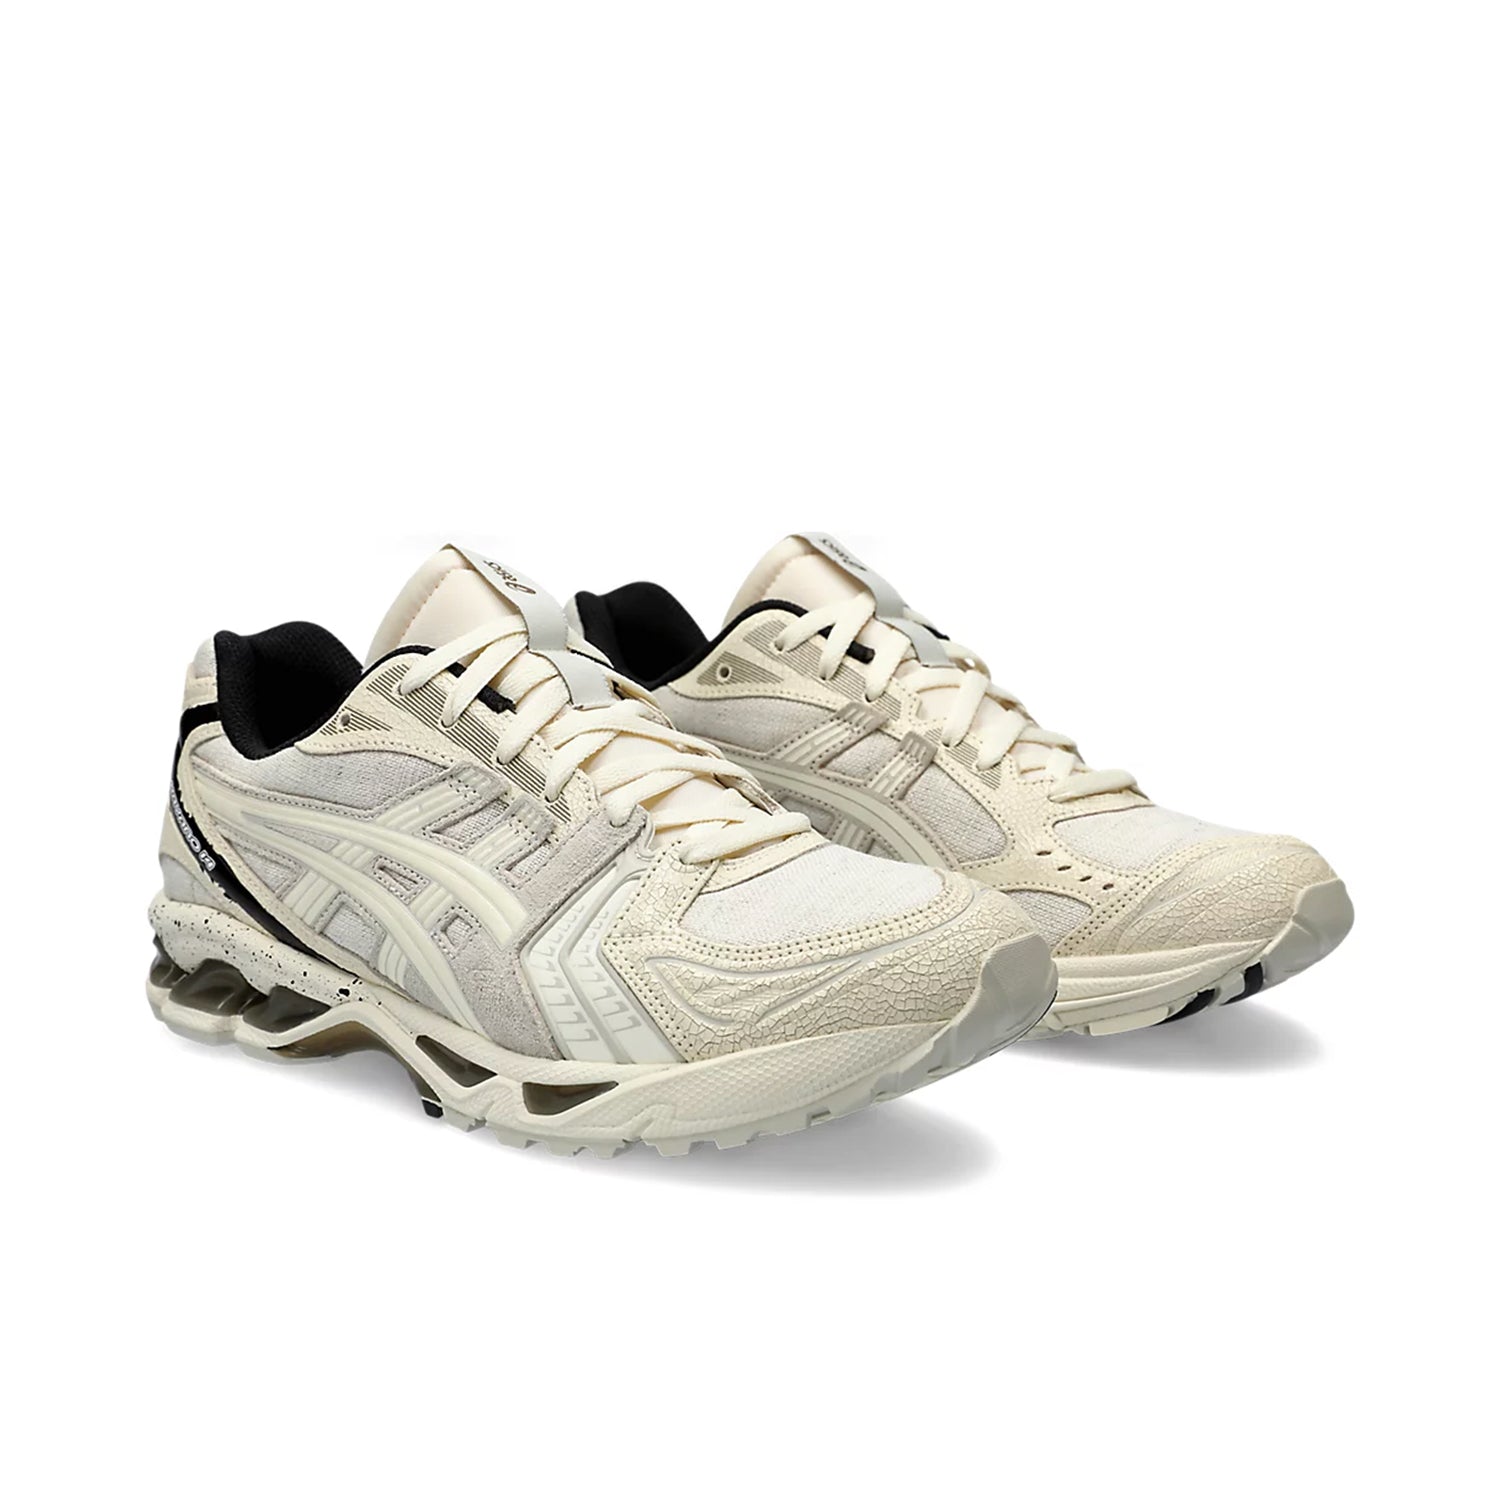 Gel-Kayano 14 Imperfection - INVINCIBLE